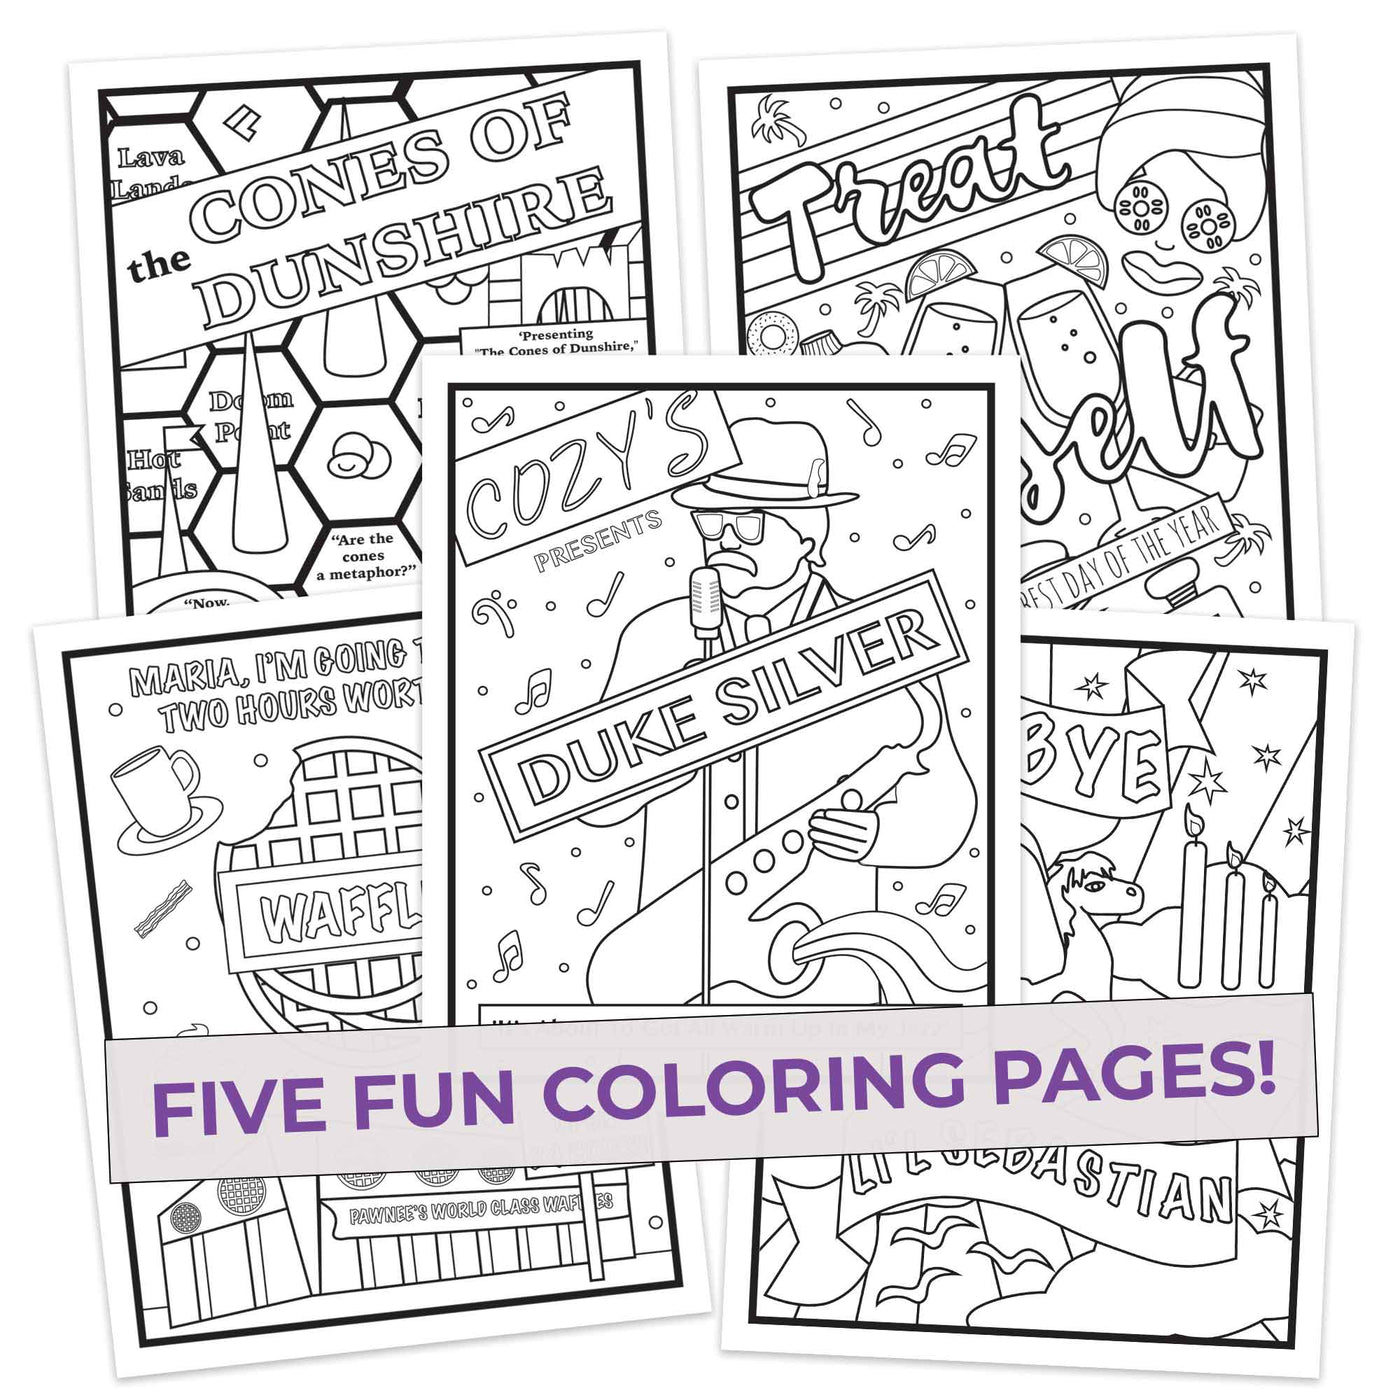 Colors and Recreation Coloring Pages (5 Pack) for Fans of Parks & Rec